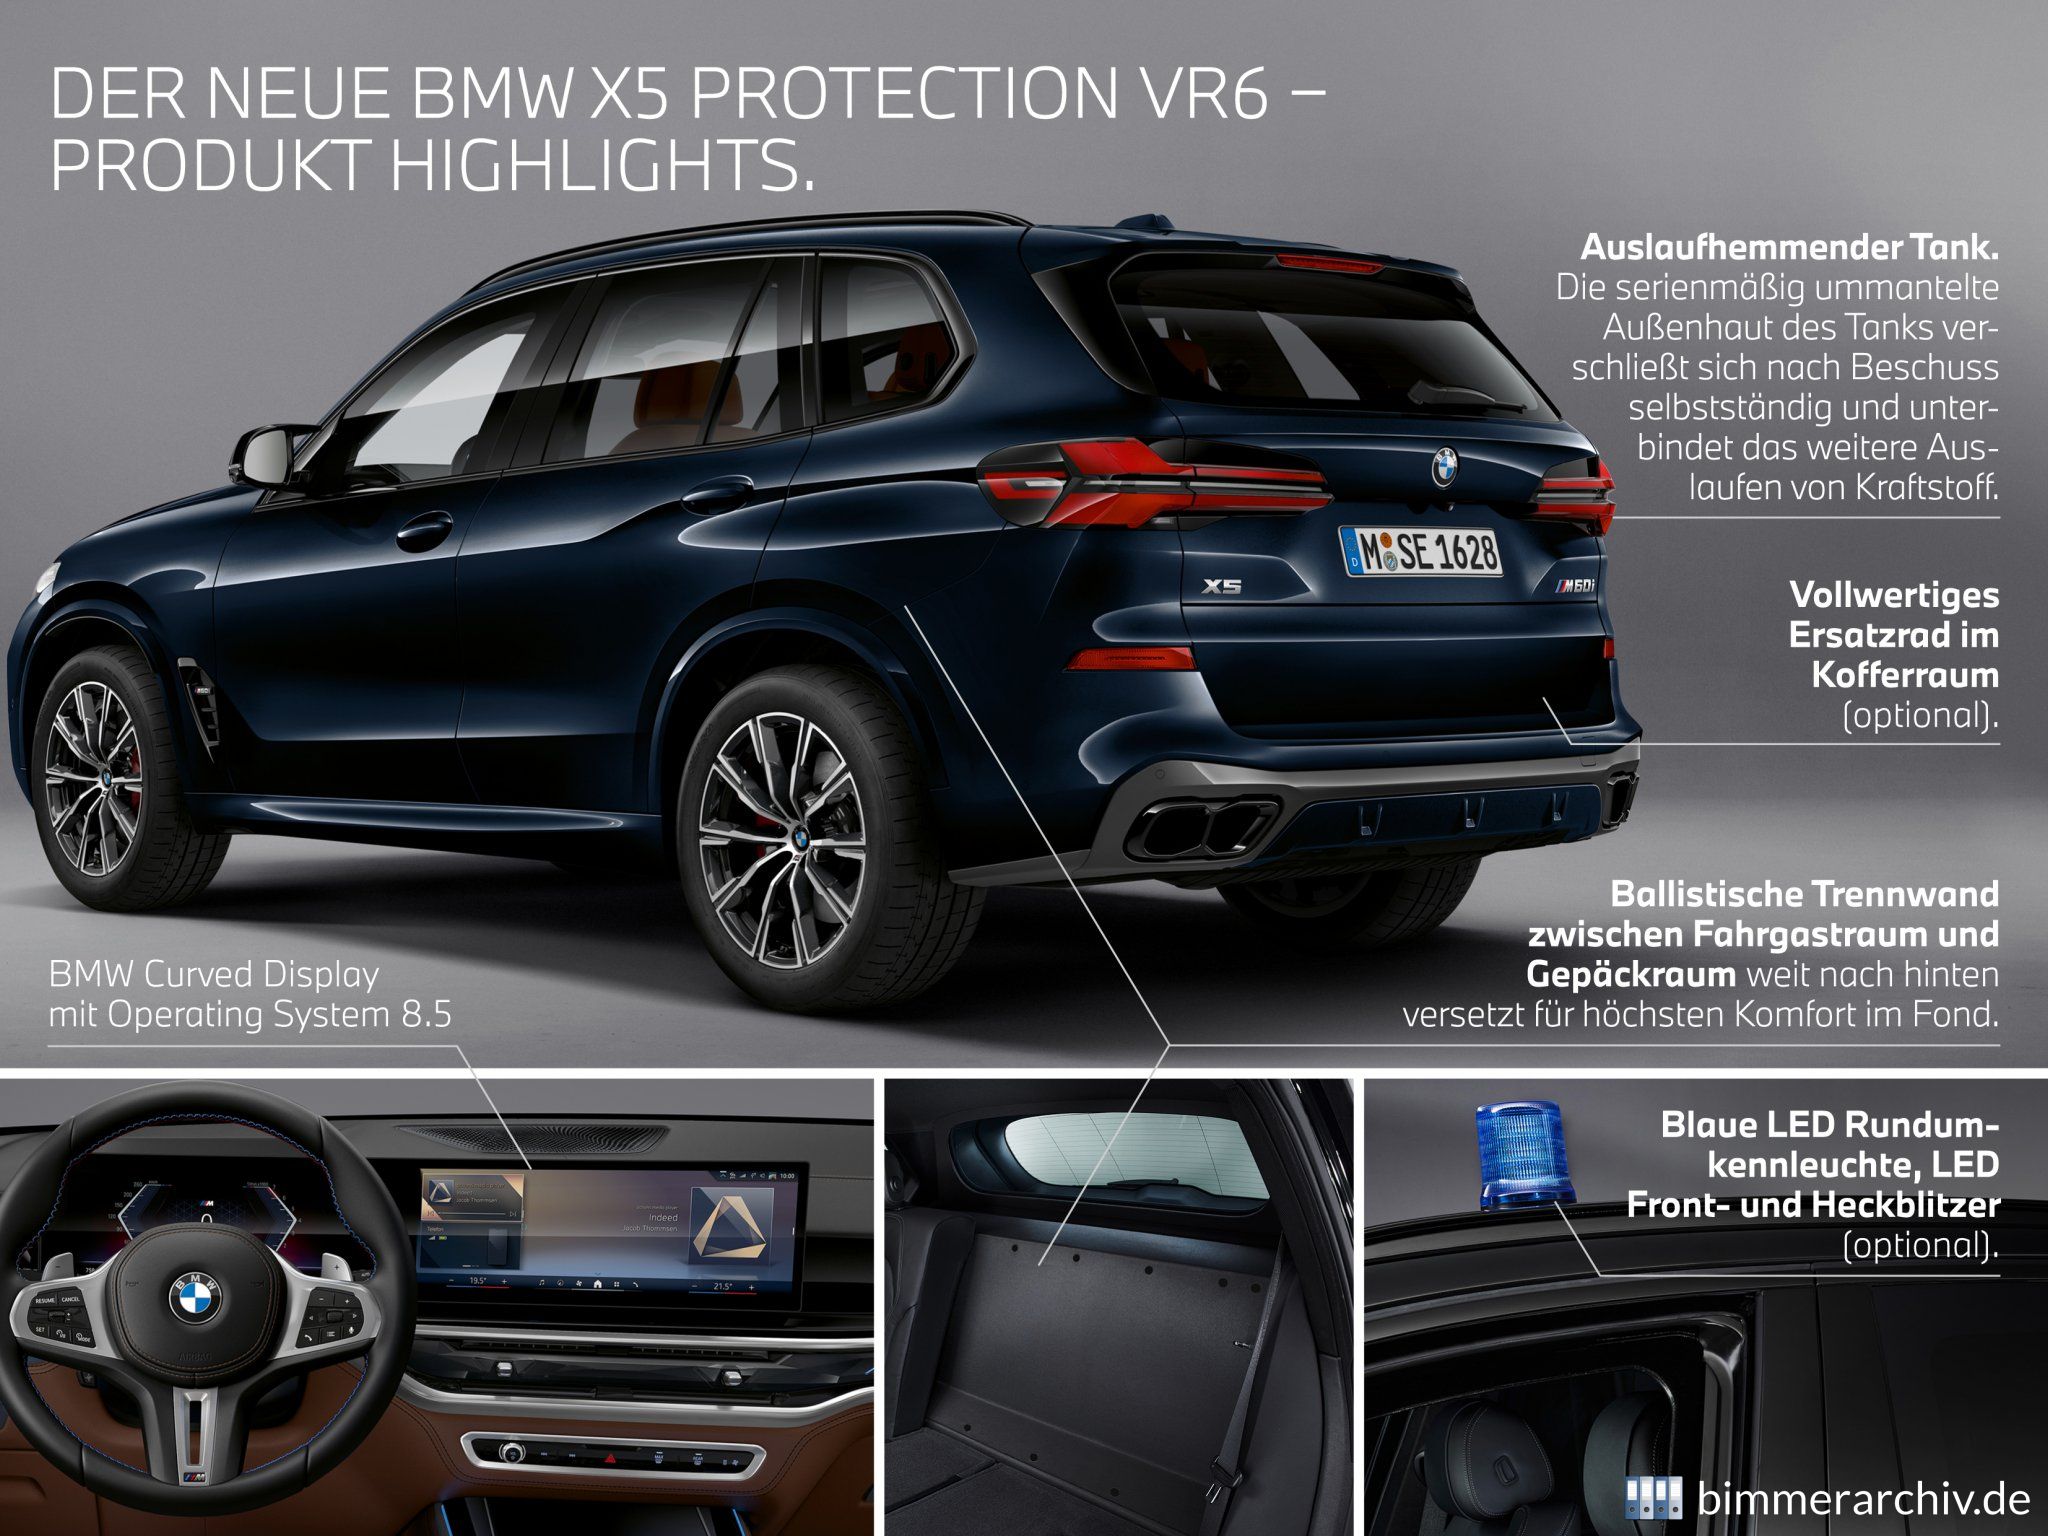 BMW X5 Protection VR6 - Highlights